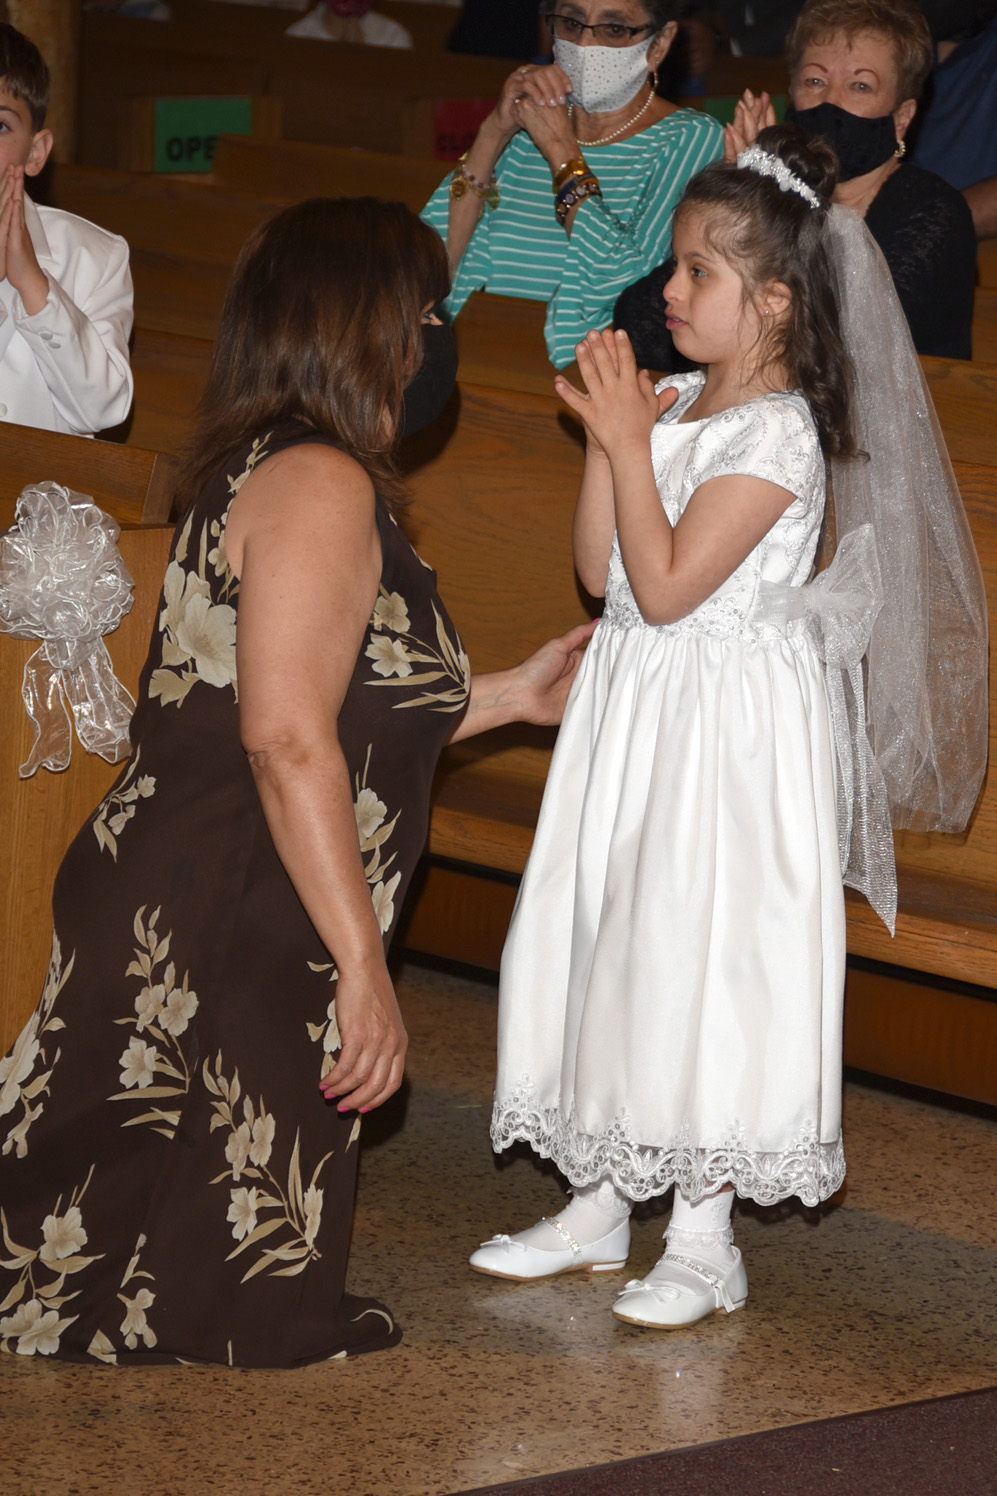 FIRST-COMMUNION-MAY-2-2021-1001001237